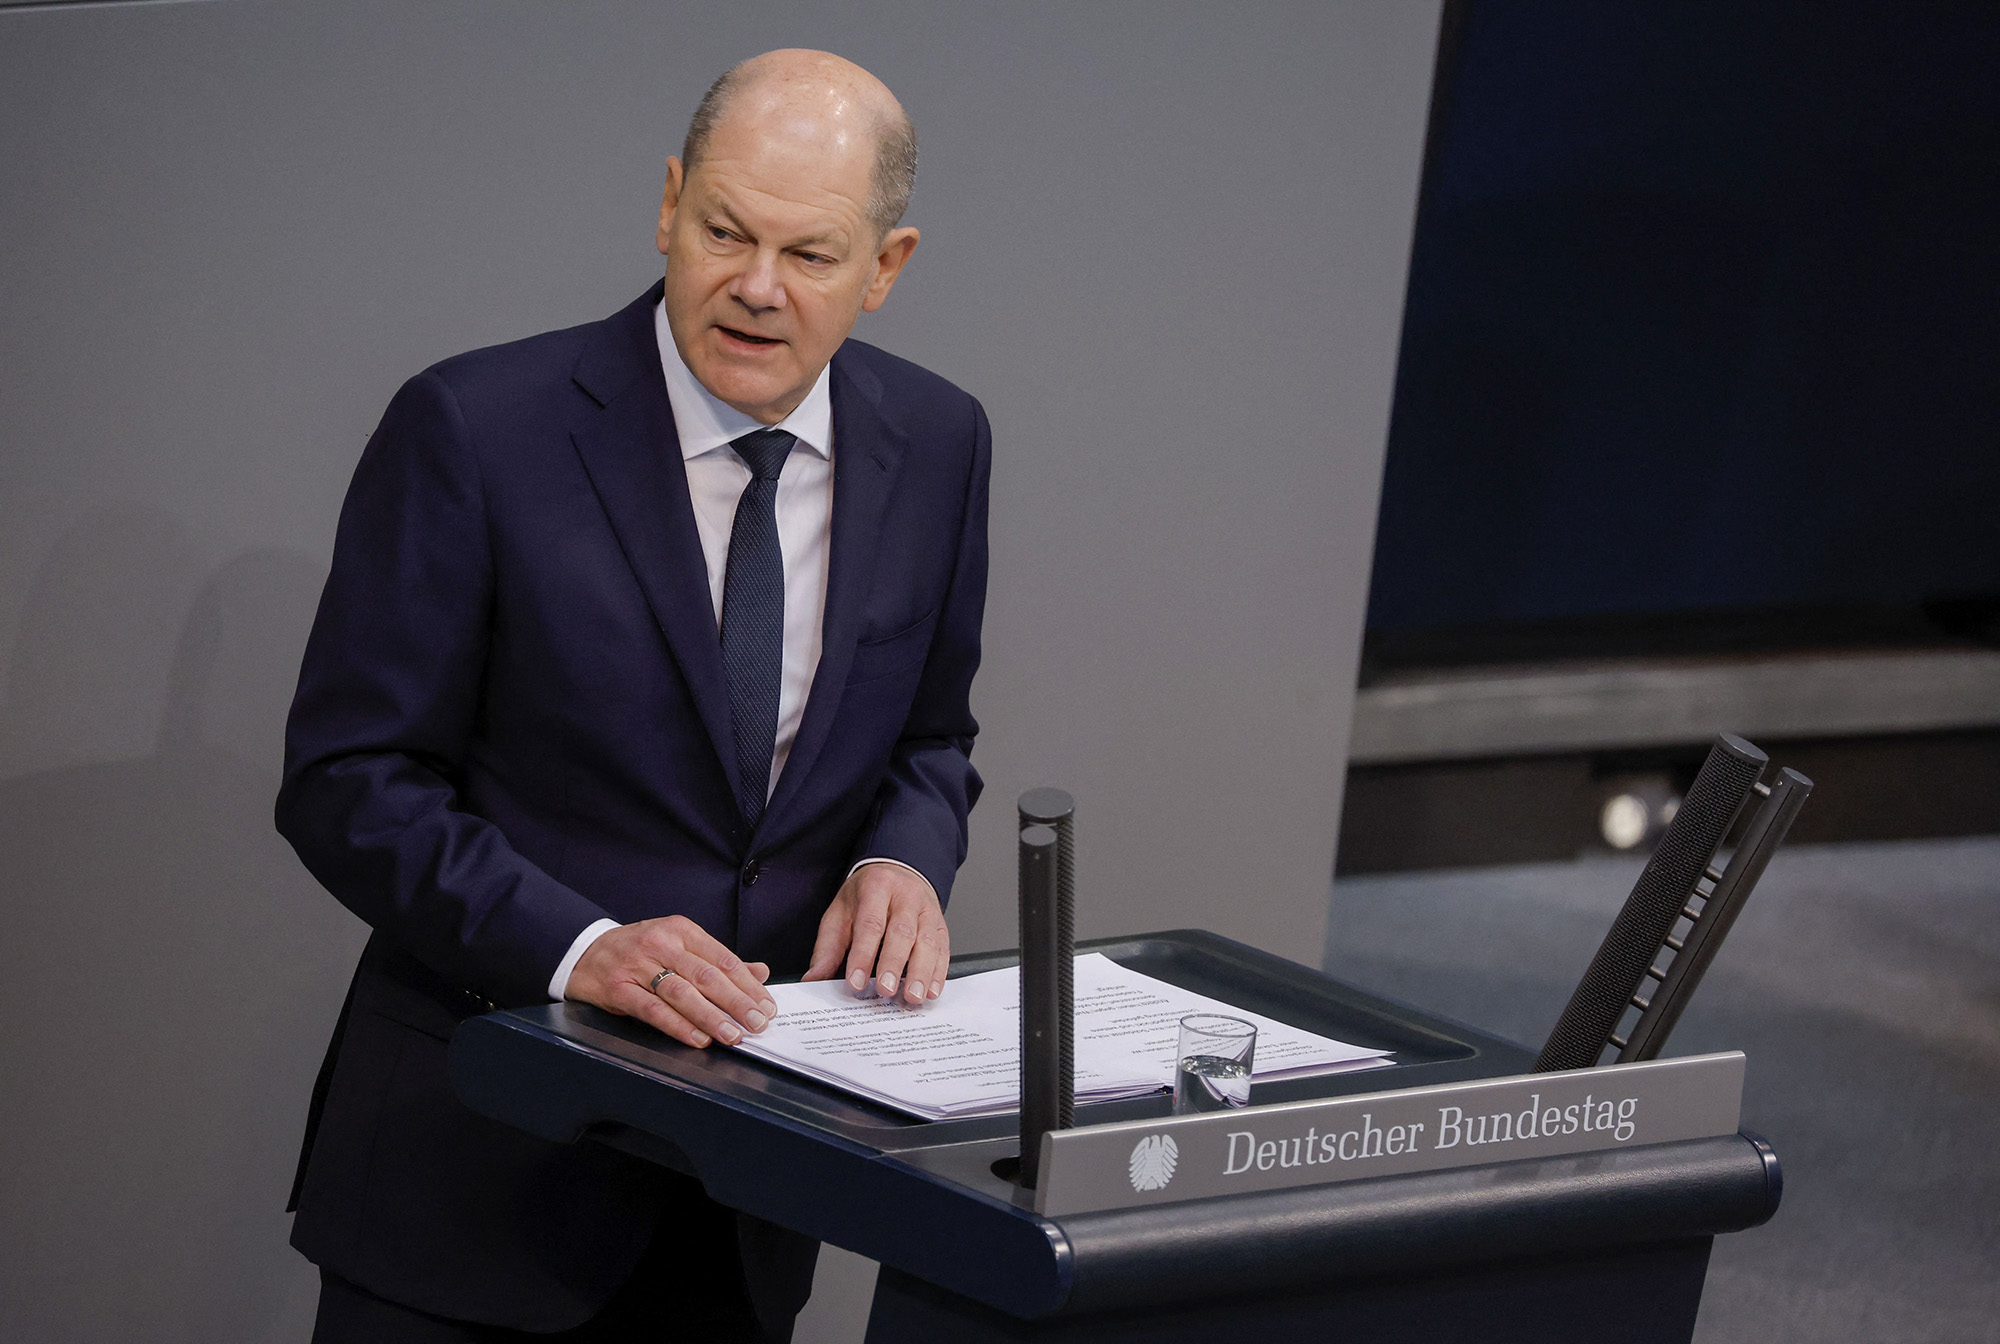 German Chancellor Olaf Scholz addresses the Bundestag in Berlin, Germany, on March 2